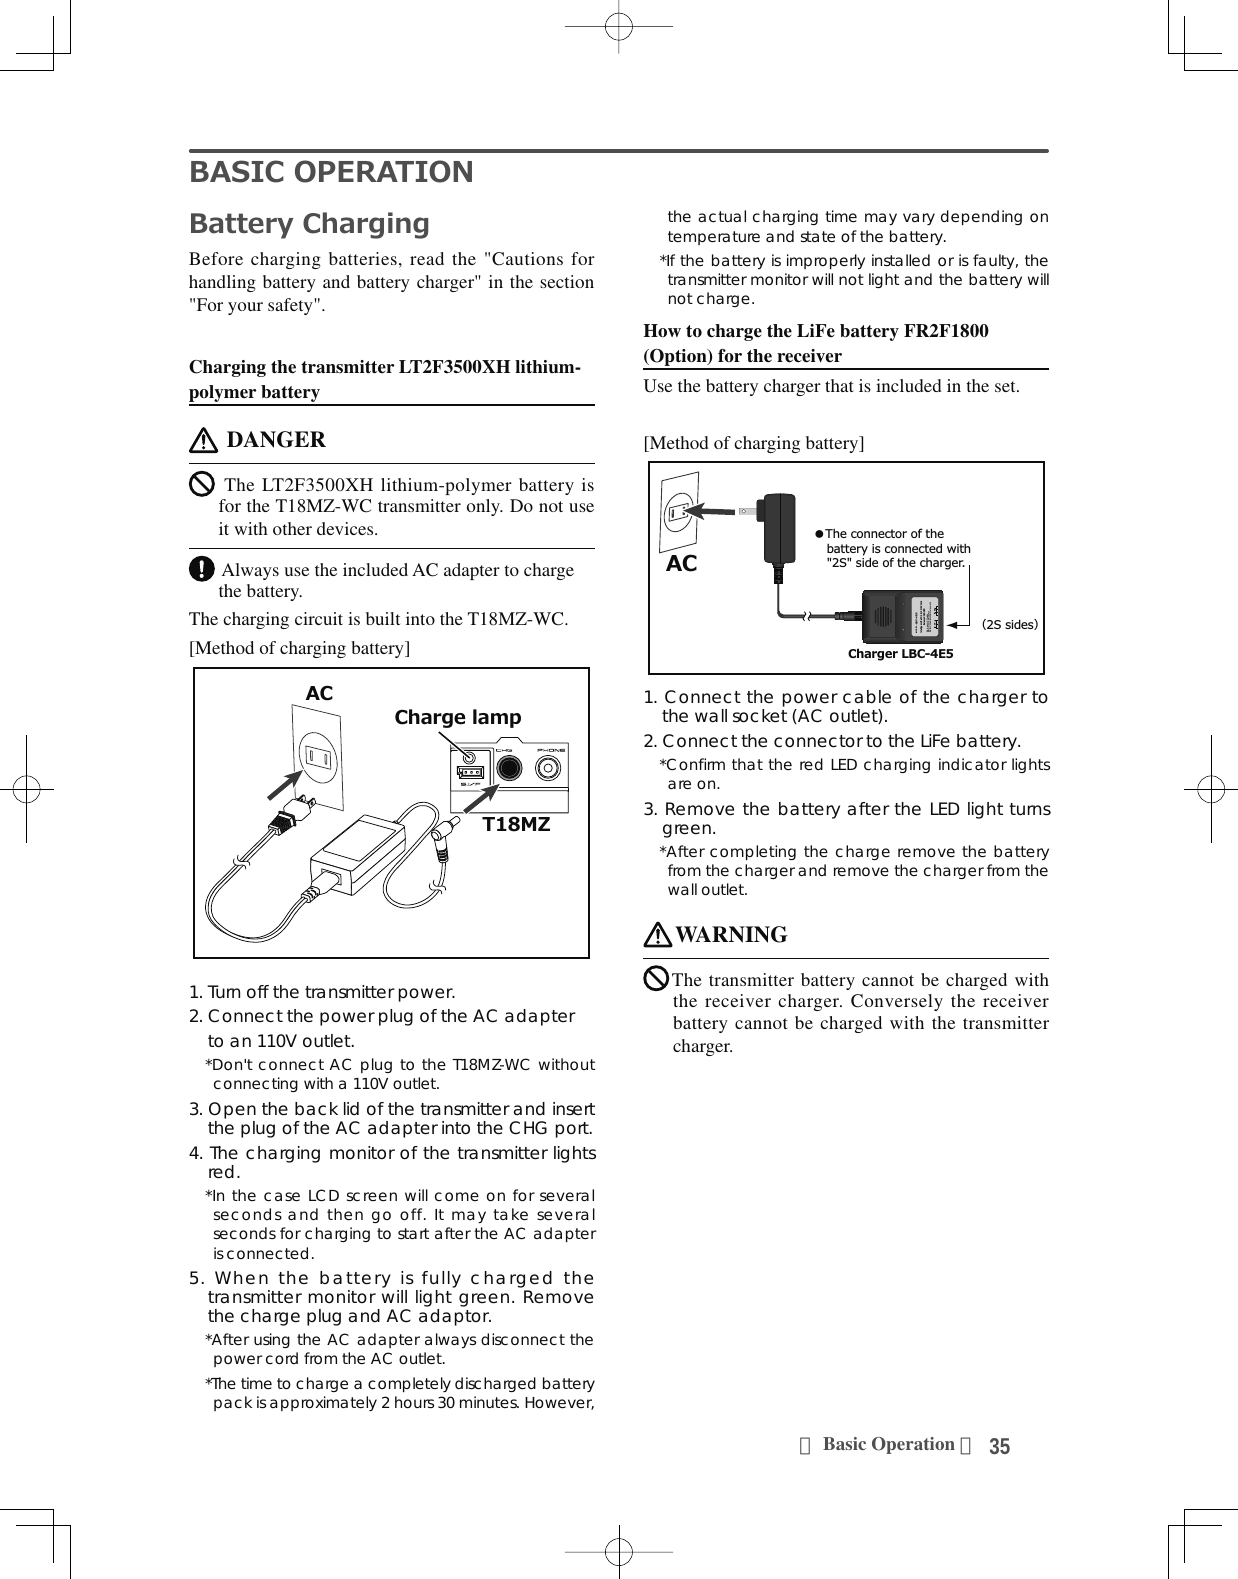 35＜Basic Operation ＞%$6,&amp;23(5$7,21%DWWHU\&amp;KDUJLQJBefore charging batteries, read the &quot;Cautions for handling battery and battery charger&quot; in the section &quot;For your safety&quot;.Charging the transmitter LT2F3500XH lithium-polymer battery DANGER The LT2F3500XH lithium-polymer battery is for the T18MZ-WC transmitter only. Do not use it with other devices. Always use the included AC adapter to charge the battery.The charging circuit is built into the T18MZ-WC.[Method of charging battery]70=$&amp;&amp;KDUJHODPS1. Turn off the transmitter power.2. Connect the power plug of the AC adapter    to an 110V outlet.*Don&apos;t connect AC plug to the T18MZ-WC without connecting with a 110V outlet.3. Open the back lid of the transmitter and insert the plug of the AC adapter into the CHG port.4. The charging monitor of the transmitter lights red.*In the case LCD screen will come on for several seconds and then go off. It may take several seconds for charging to start after the AC adapter is connected.5. When the battery is fully charged the transmitter monitor will light green. Remove the charge plug and AC adaptor.*After using the AC adapter always disconnect the power cord from the AC outlet.*The time to charge a completely discharged battery pack is approximately 2 hours 30 minutes. However, the actual charging time may vary depending on temperature and state of the battery.*If the battery is improperly installed or is faulty, the transmitter monitor will not light and the battery will not charge.How to charge the LiFe battery FR2F1800 (Option) for the receiverUse the battery charger that is included in the set.[Method of charging battery]$&amp;3S2SMODEL :LBC-4E5Intelligent LiFePO4 for 2S/3S CellsBalance CHARGERRed on, green off : ChargingRed flash : Output short-circuit or wrong polarityGreen on, red off : Charging Fullٴ7KHFRQQHFWRURIWKHEDWWHU\LVFRQQHFWHGZLWK6VLGHRIWKHFKDUJHUق6VLGHVك&amp;KDUJHU/%&amp;(1. Connect the power cable of the charger to the wall socket (AC outlet).2. Connect the connector to the LiFe battery.*Confirm that the red LED charging indicator lights are on.3. Remove the battery after the LED light turns green.*After completing the charge remove the battery from the charger and remove the charger from the wall outlet.WARNINGThe transmitter battery cannot be charged with the receiver charger. Conversely the receiver battery cannot be charged with the transmitter charger.